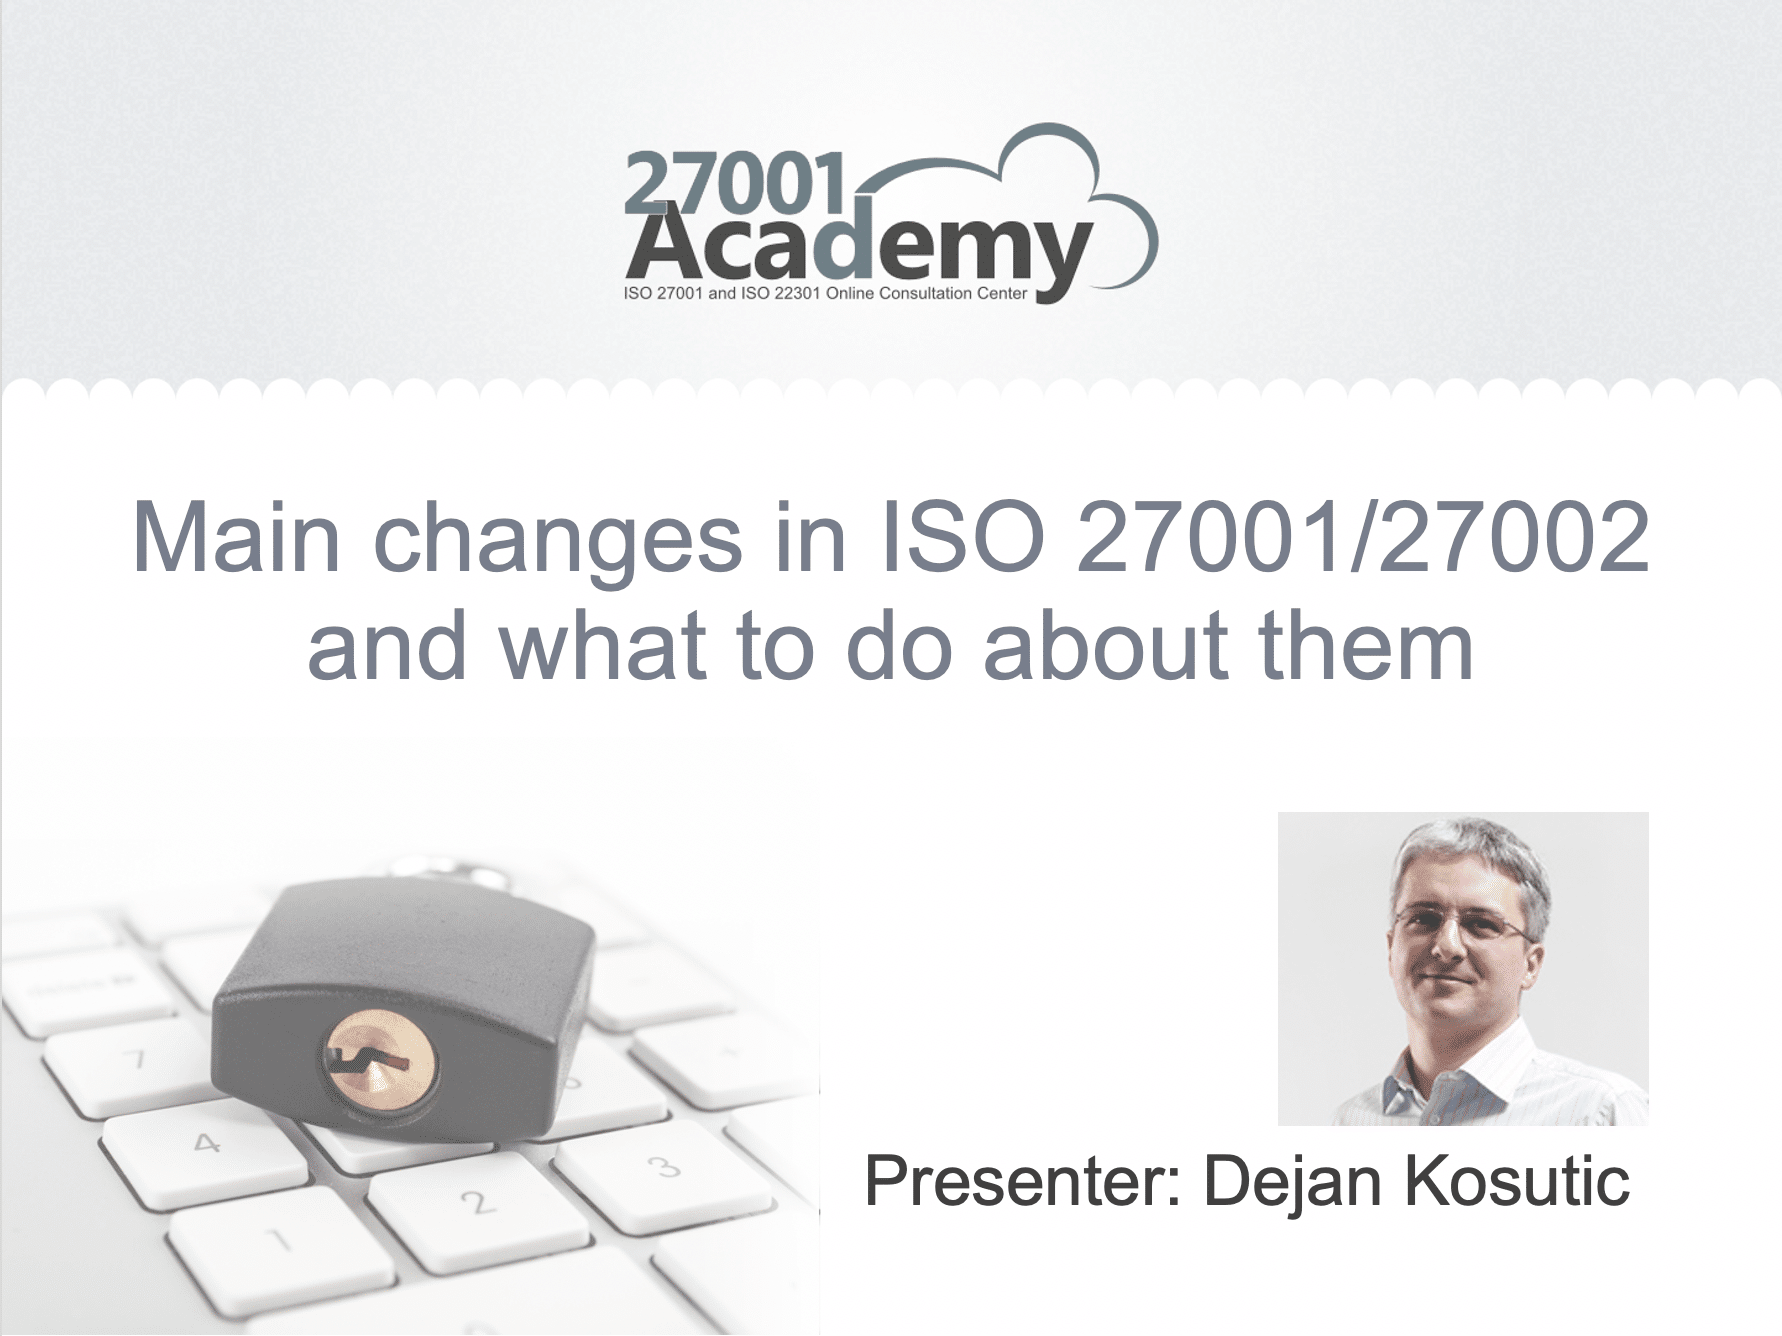 Free webinar – Main changes in ISO 27001/27002 and what to do about them